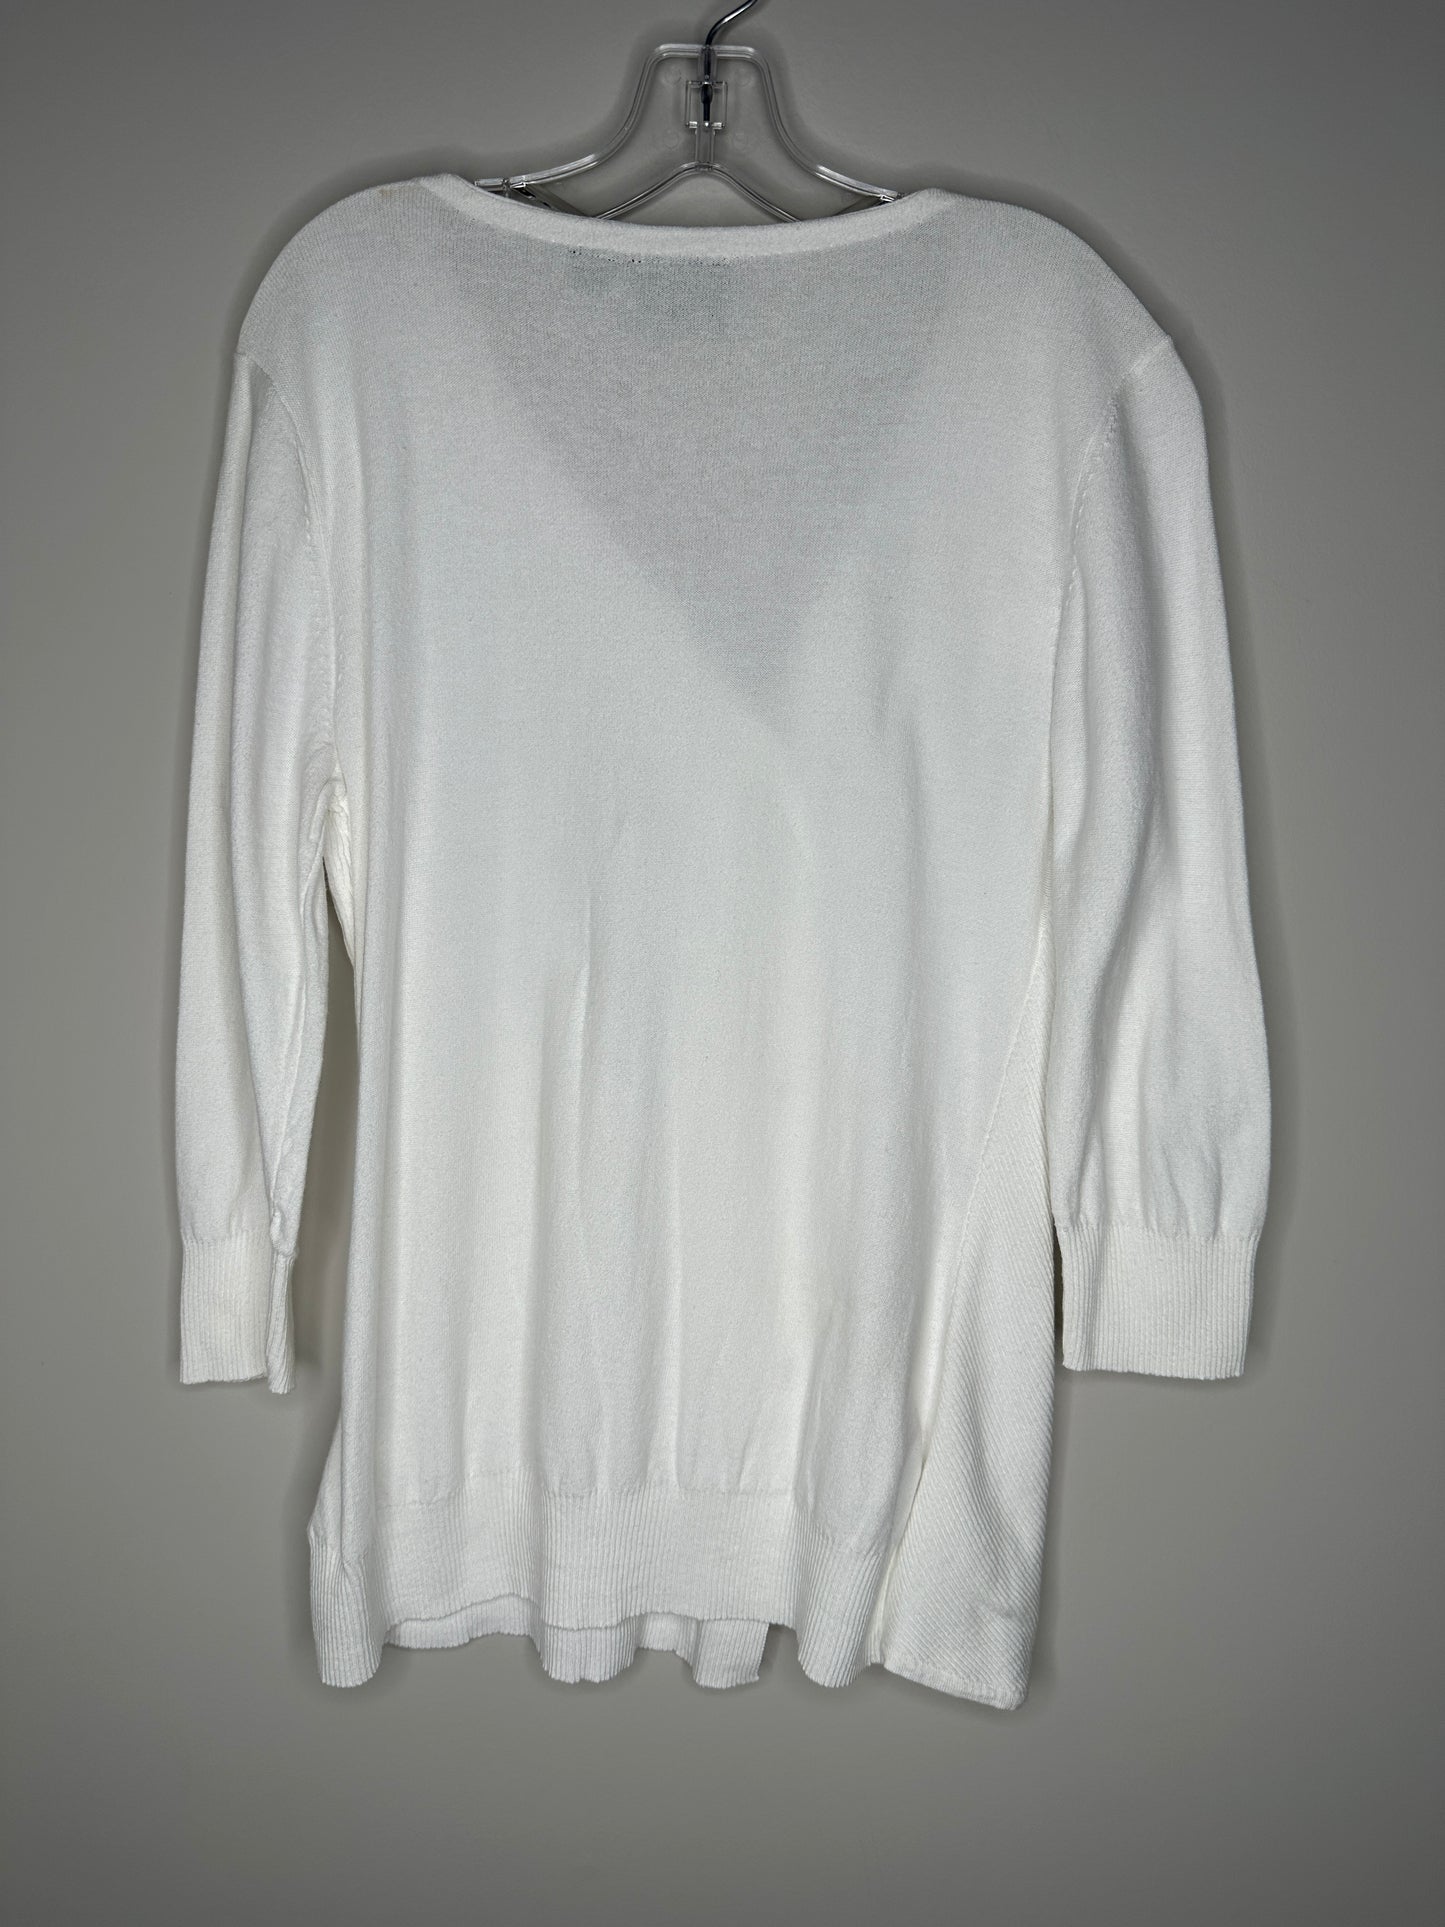 Tribal Size S White V-Neck 3/4 Sleeve Sweater with Triangle Buttons